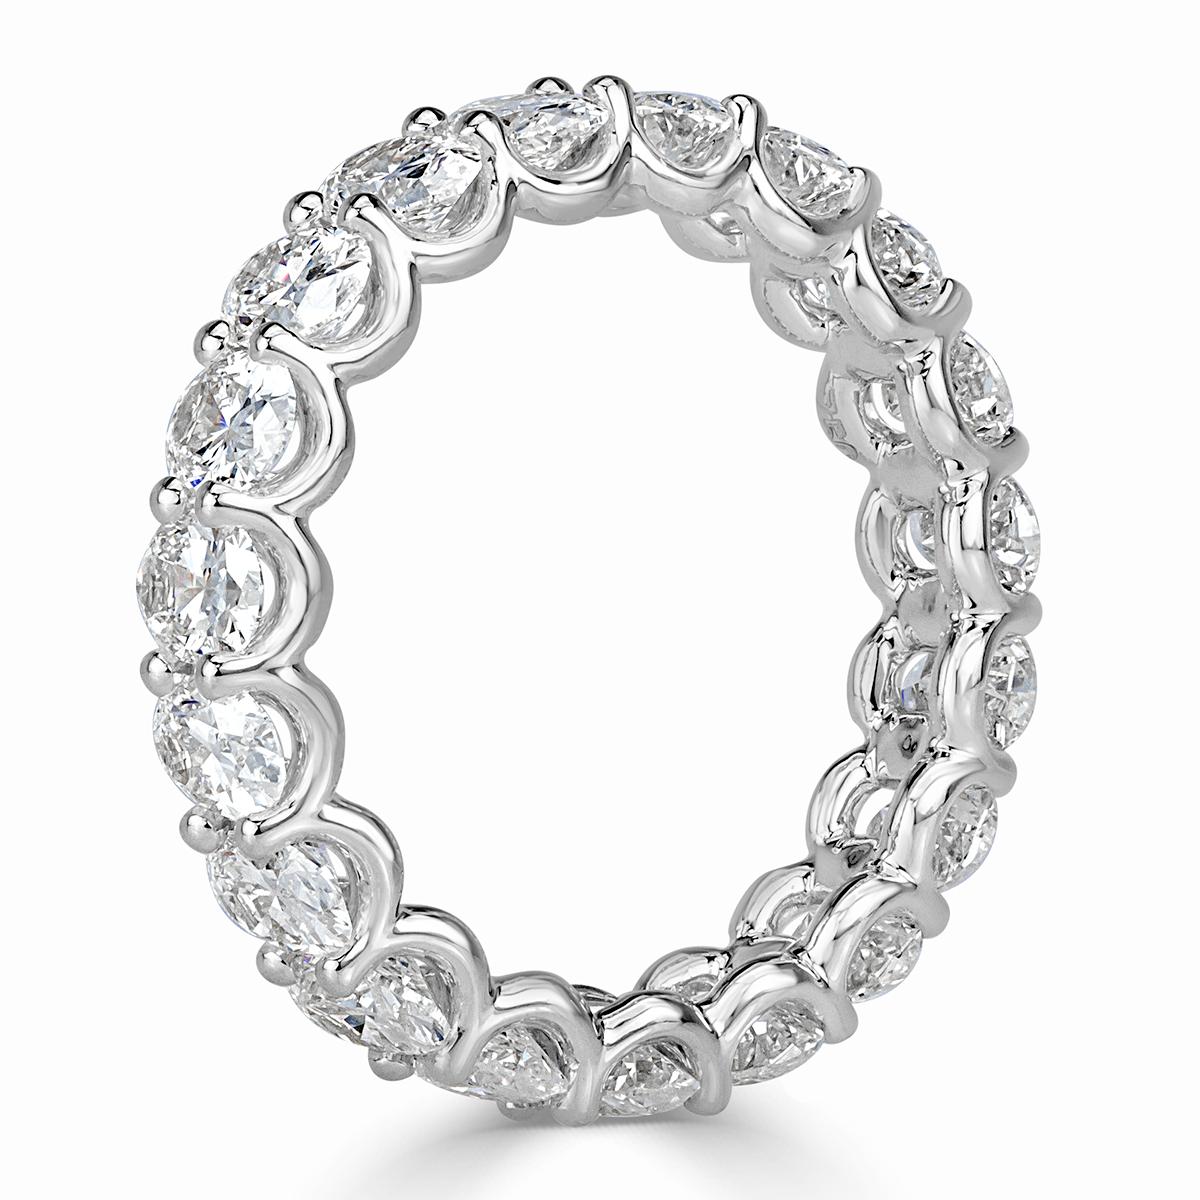 This stunning diamond eternity band showcases 3.70ct of oval cut diamonds hand set in 18k white gold. The diamonds are matched and graded at E-F, VS1-VS2. All eternity bands are shown in a size 6.5. We custom craft each eternity band and will create